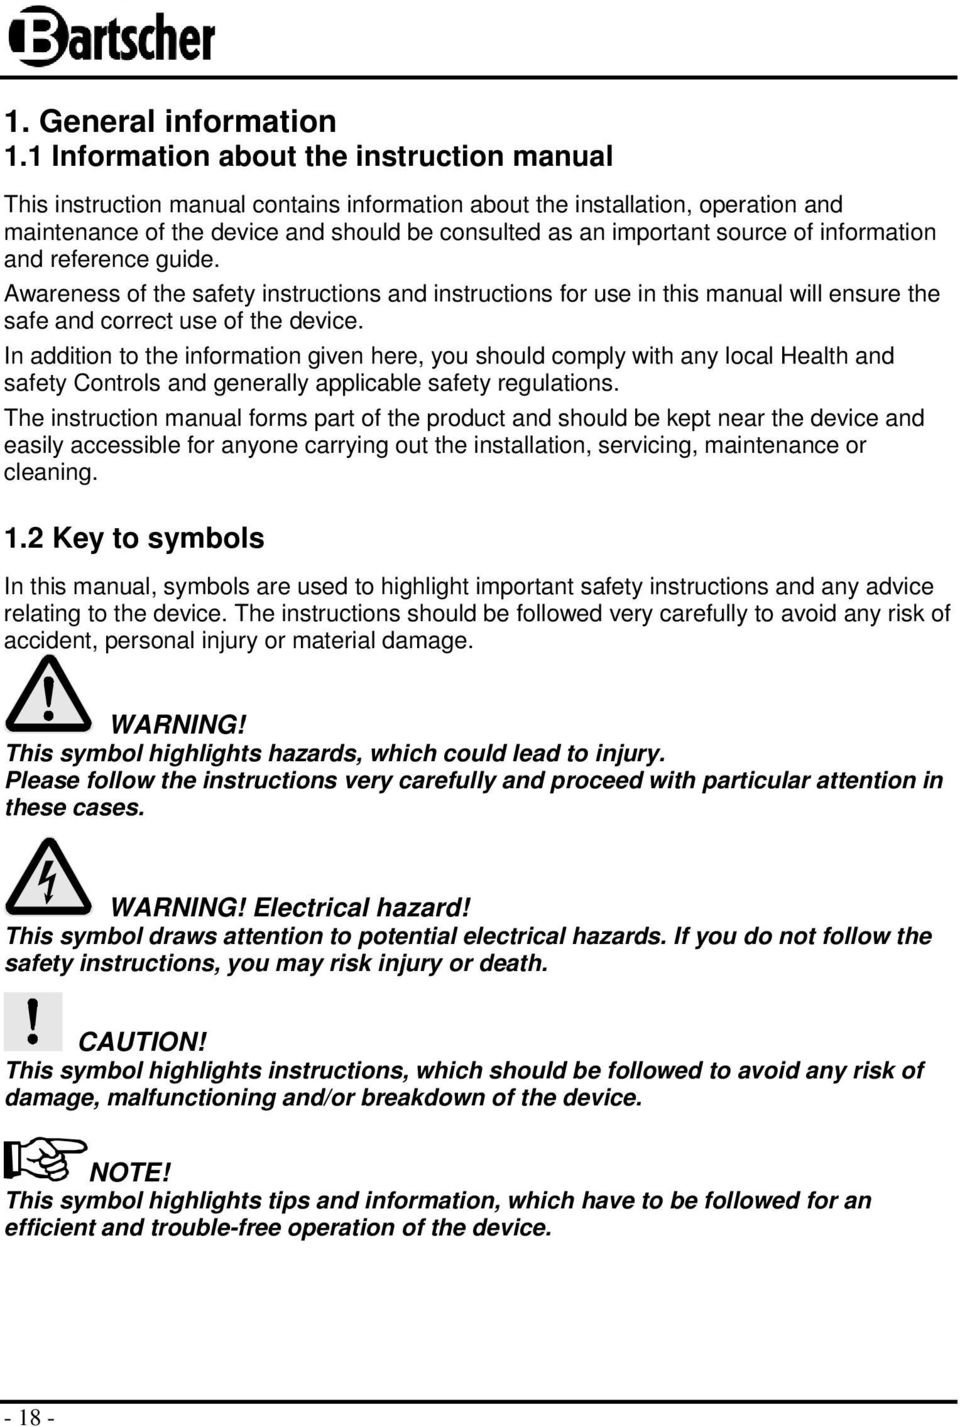 of information and reference guide. Awareness of the safety instructions and instructions for use in this manual will ensure the safe and correct use of the device.